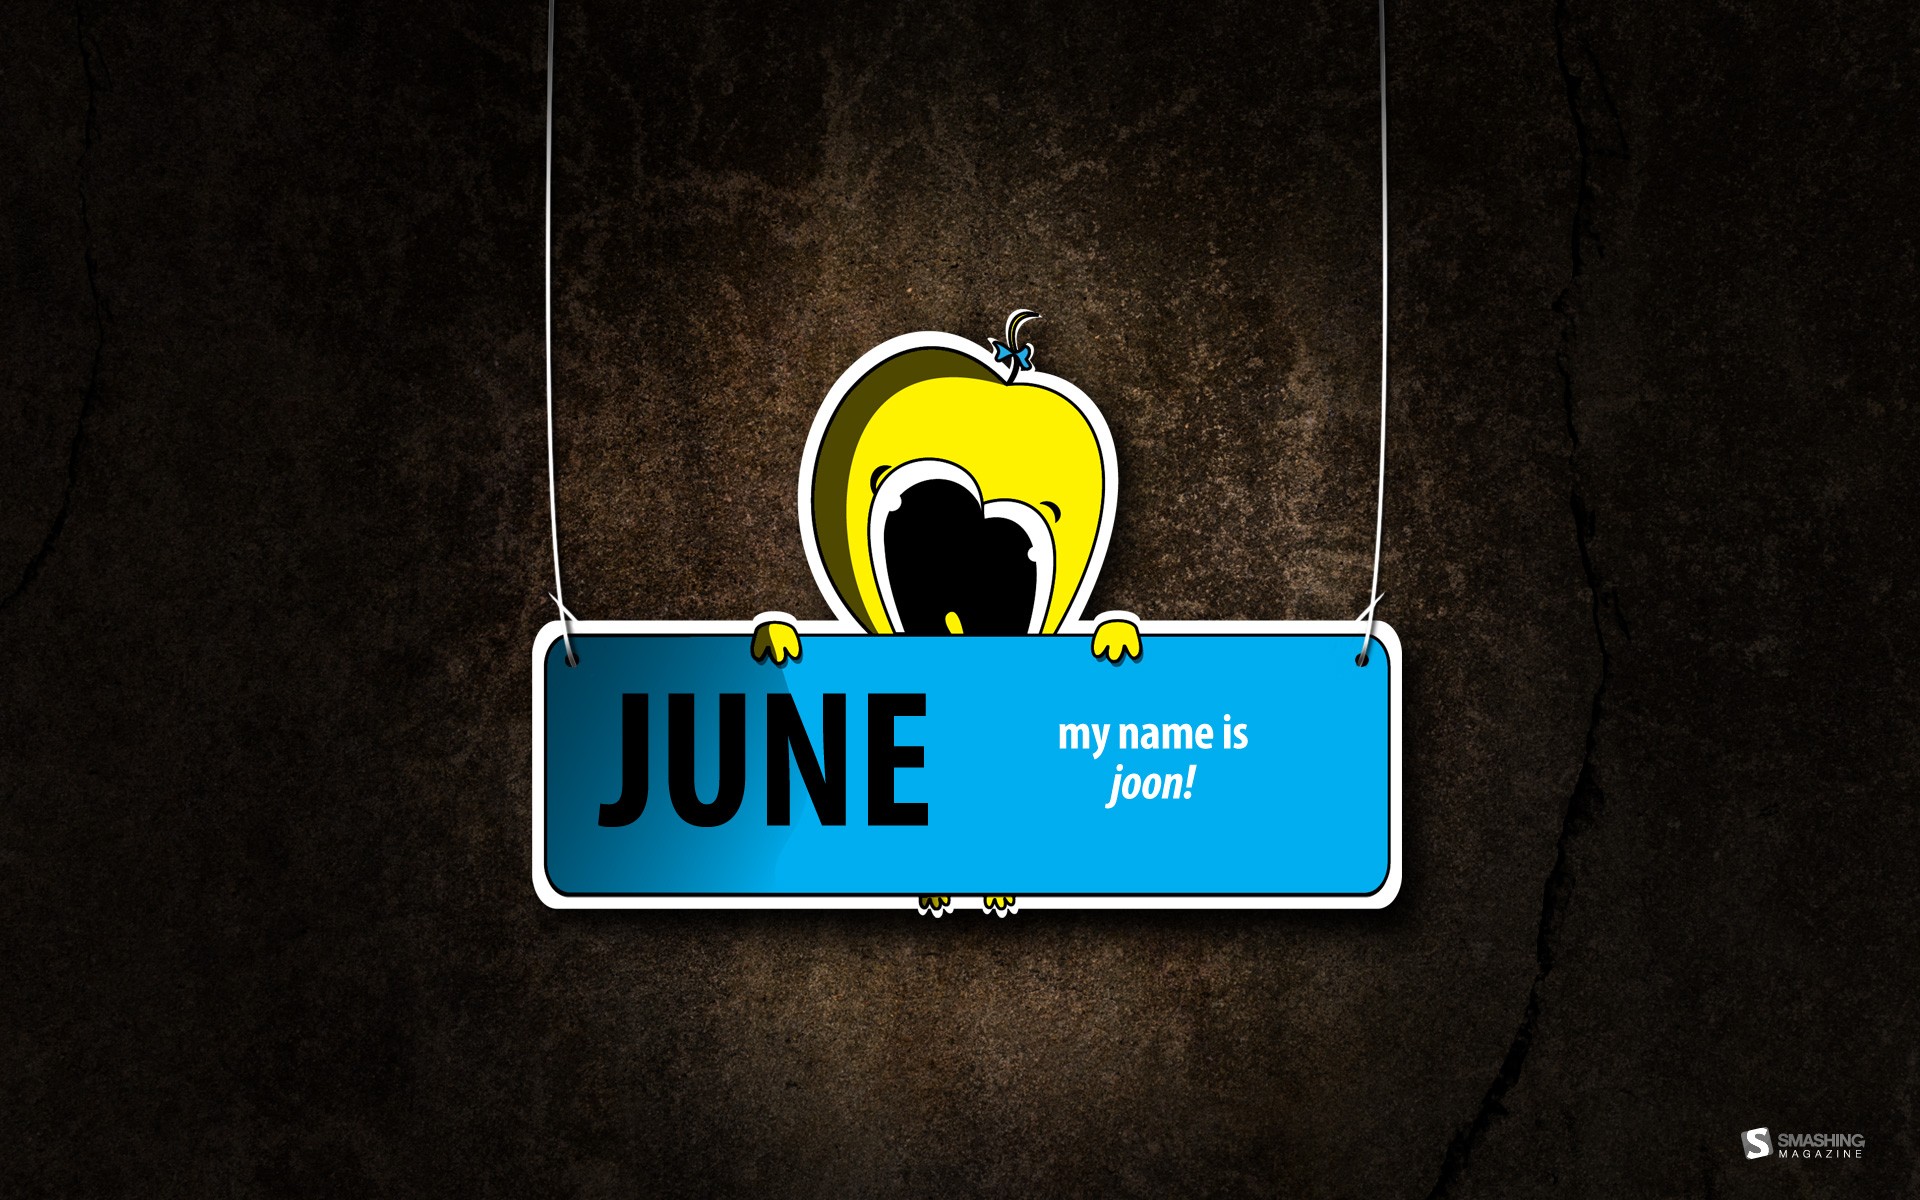 Wallpaper Named Free June is My Name Wallpapers Free June is